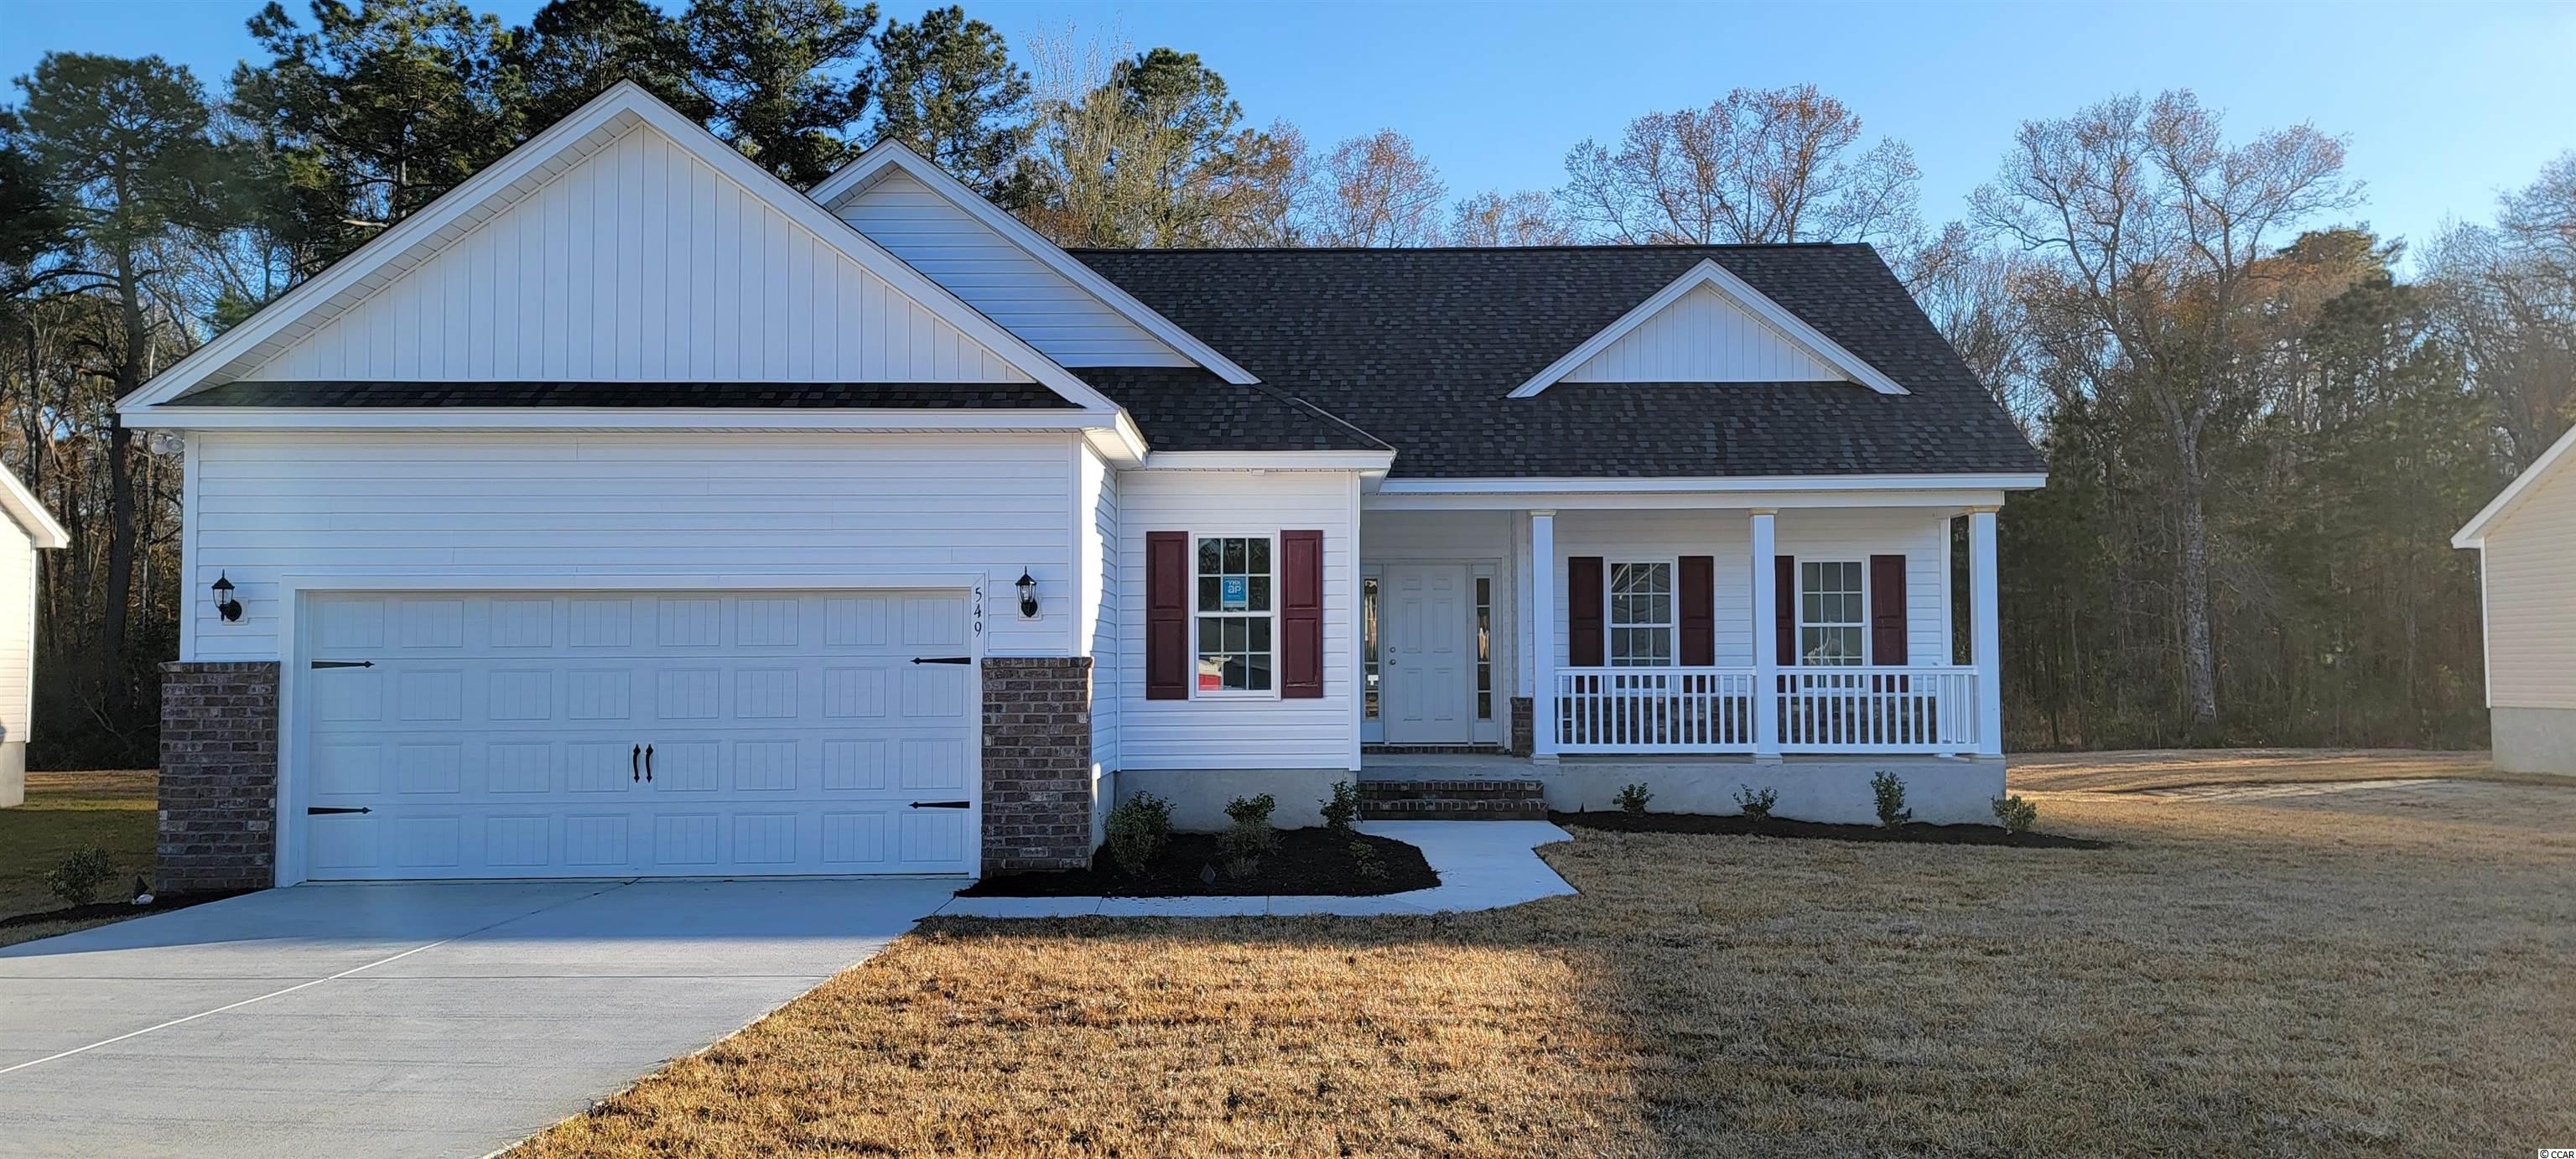 549 Rose Ave. Georgetown, SC 29440